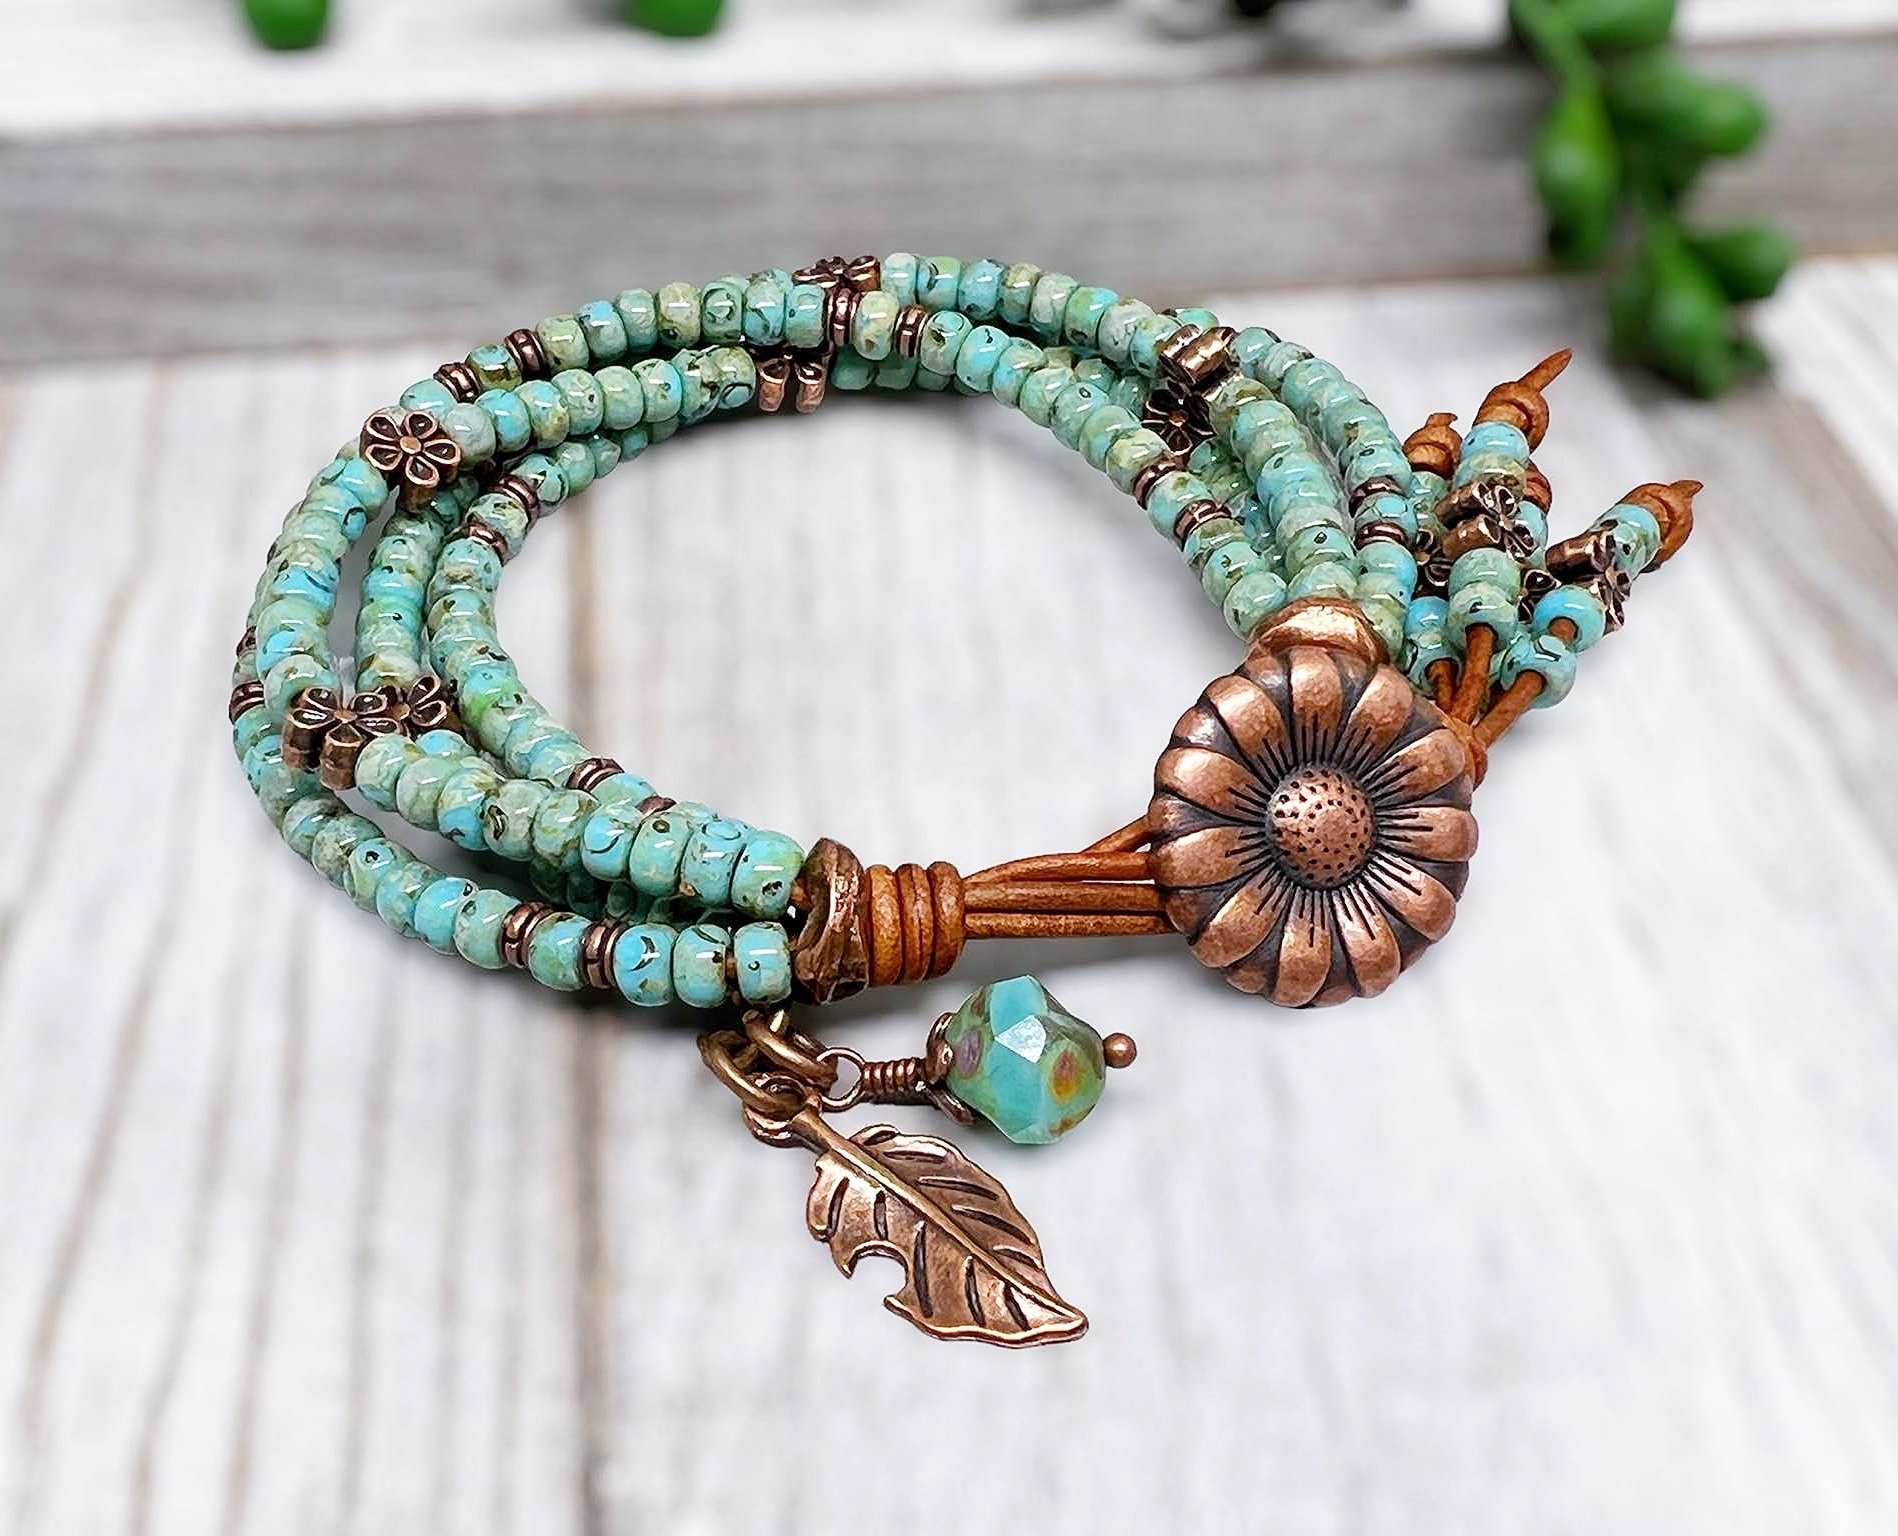 leather wrap bracelet kit, african turquoise beads, brown leather